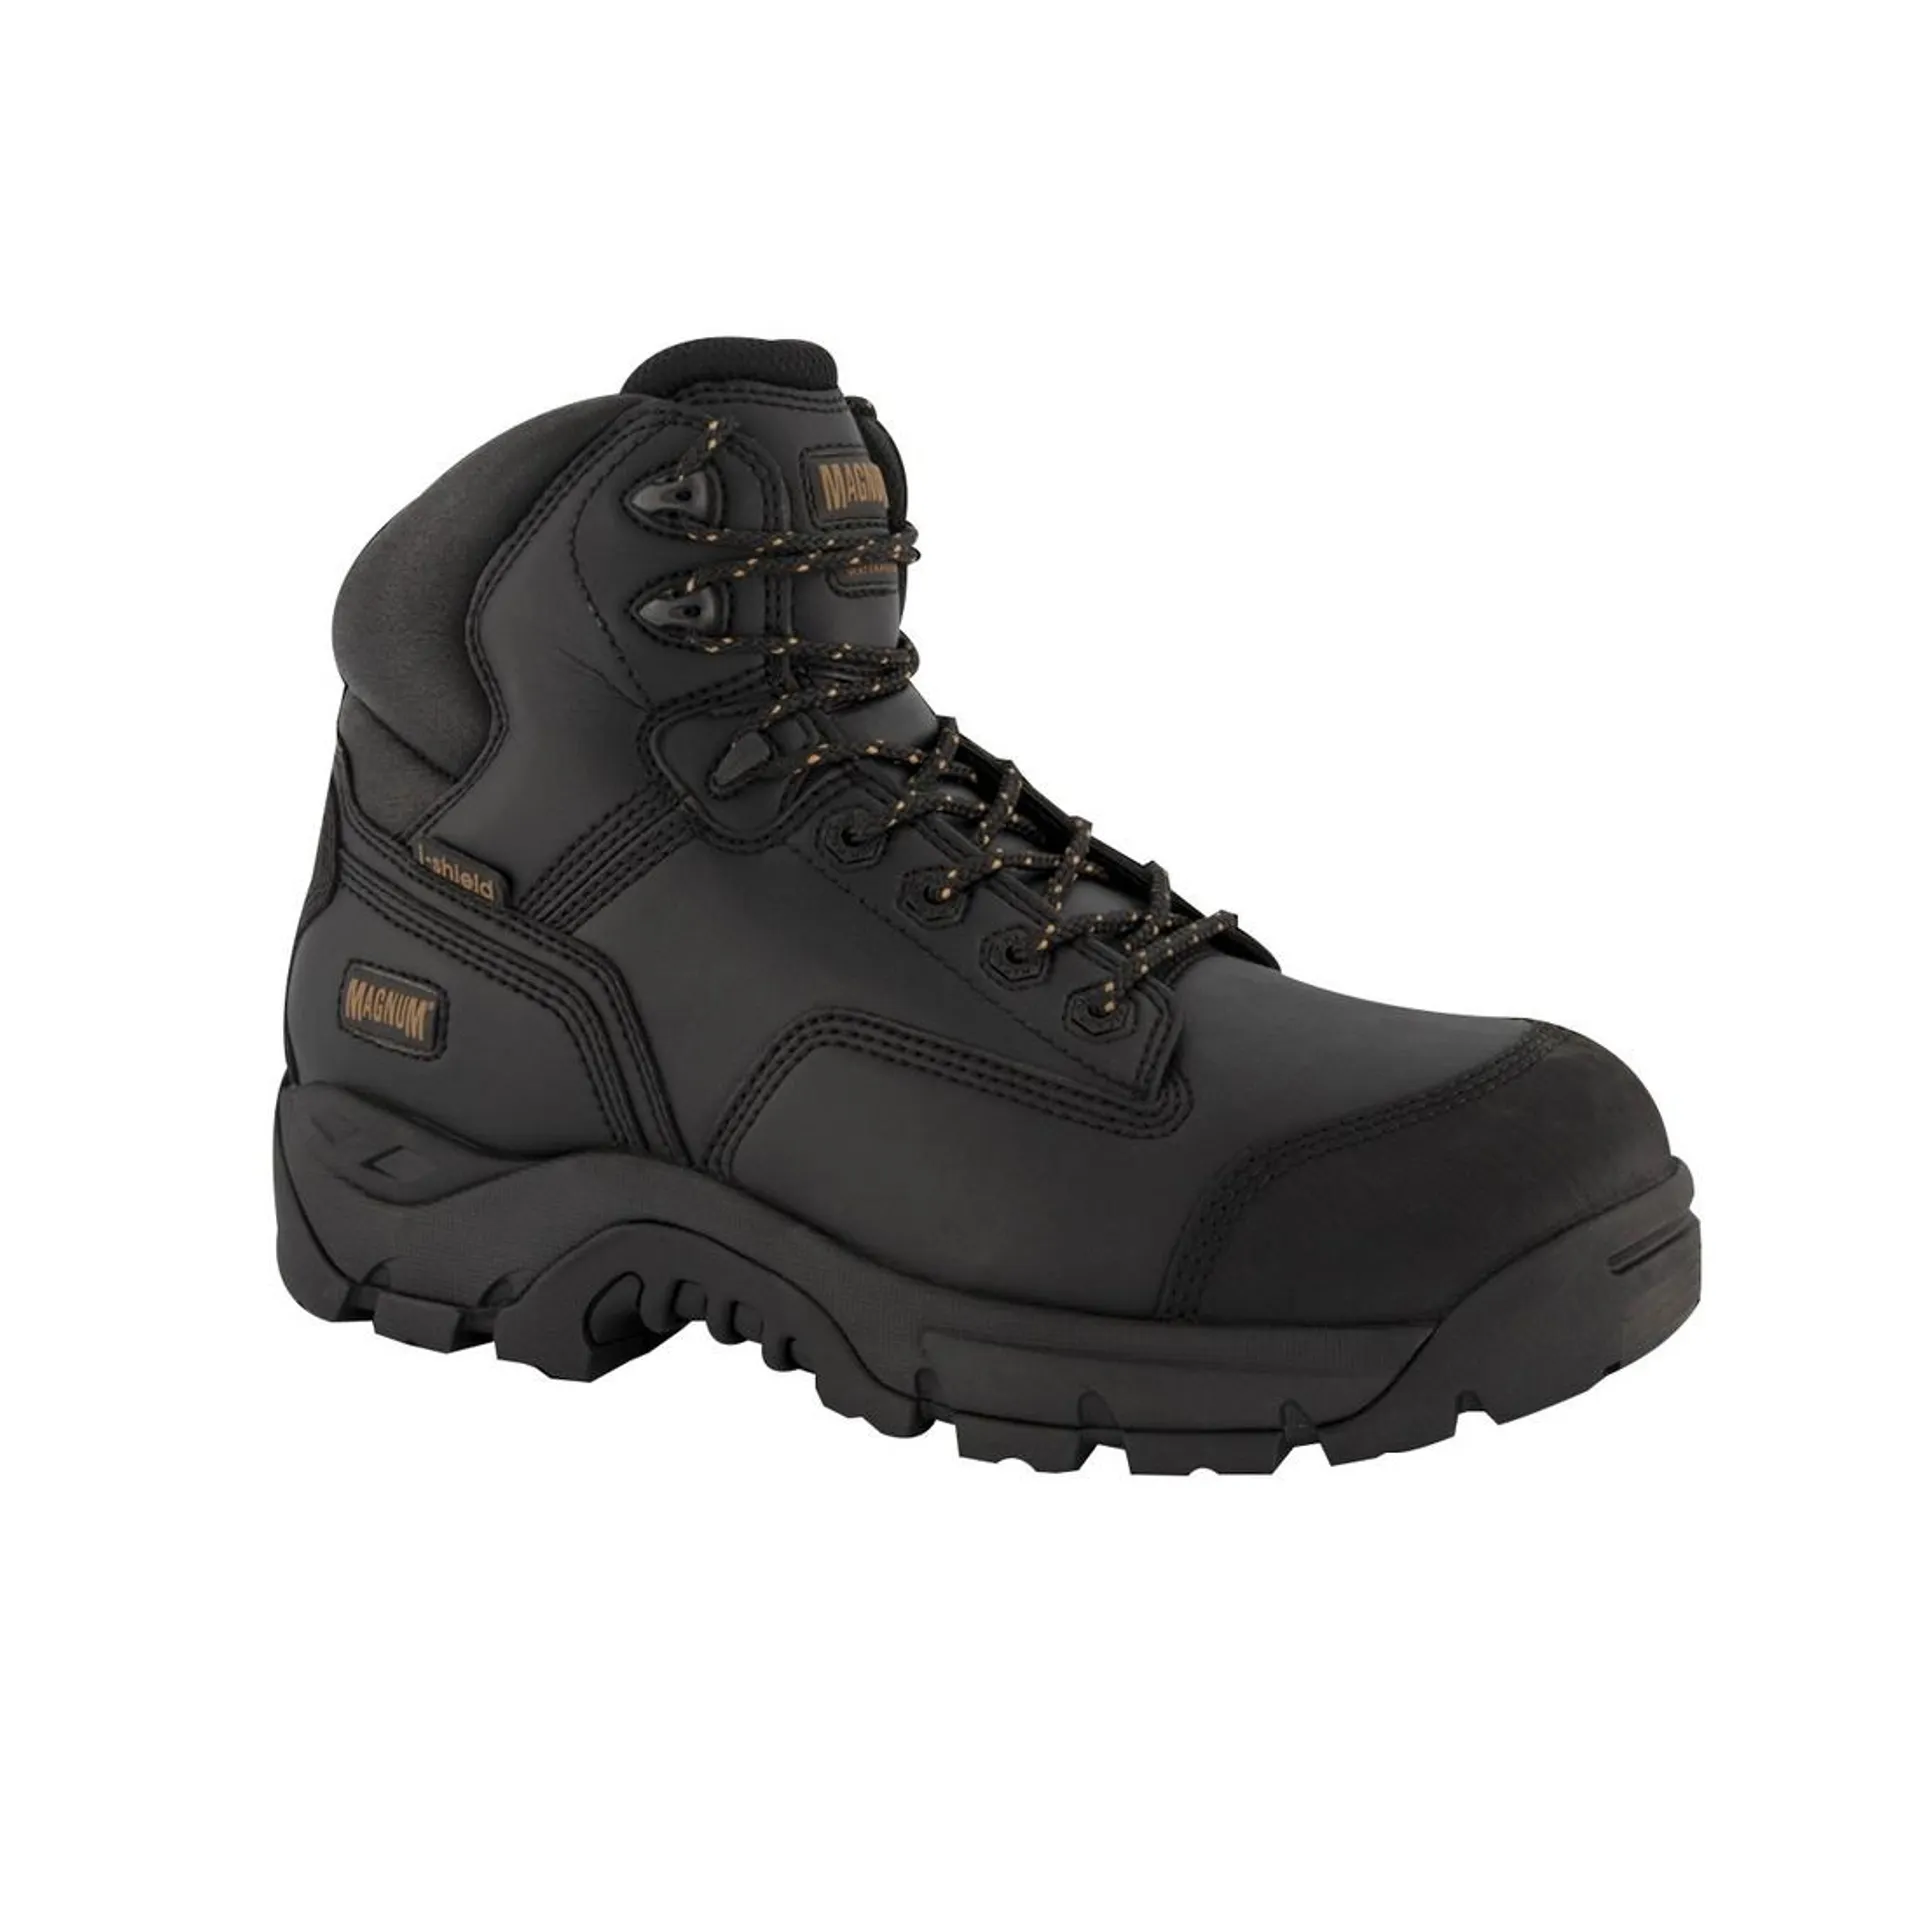 Precision Max Side Zip Composite Toe Safety Boot Black US Size 5